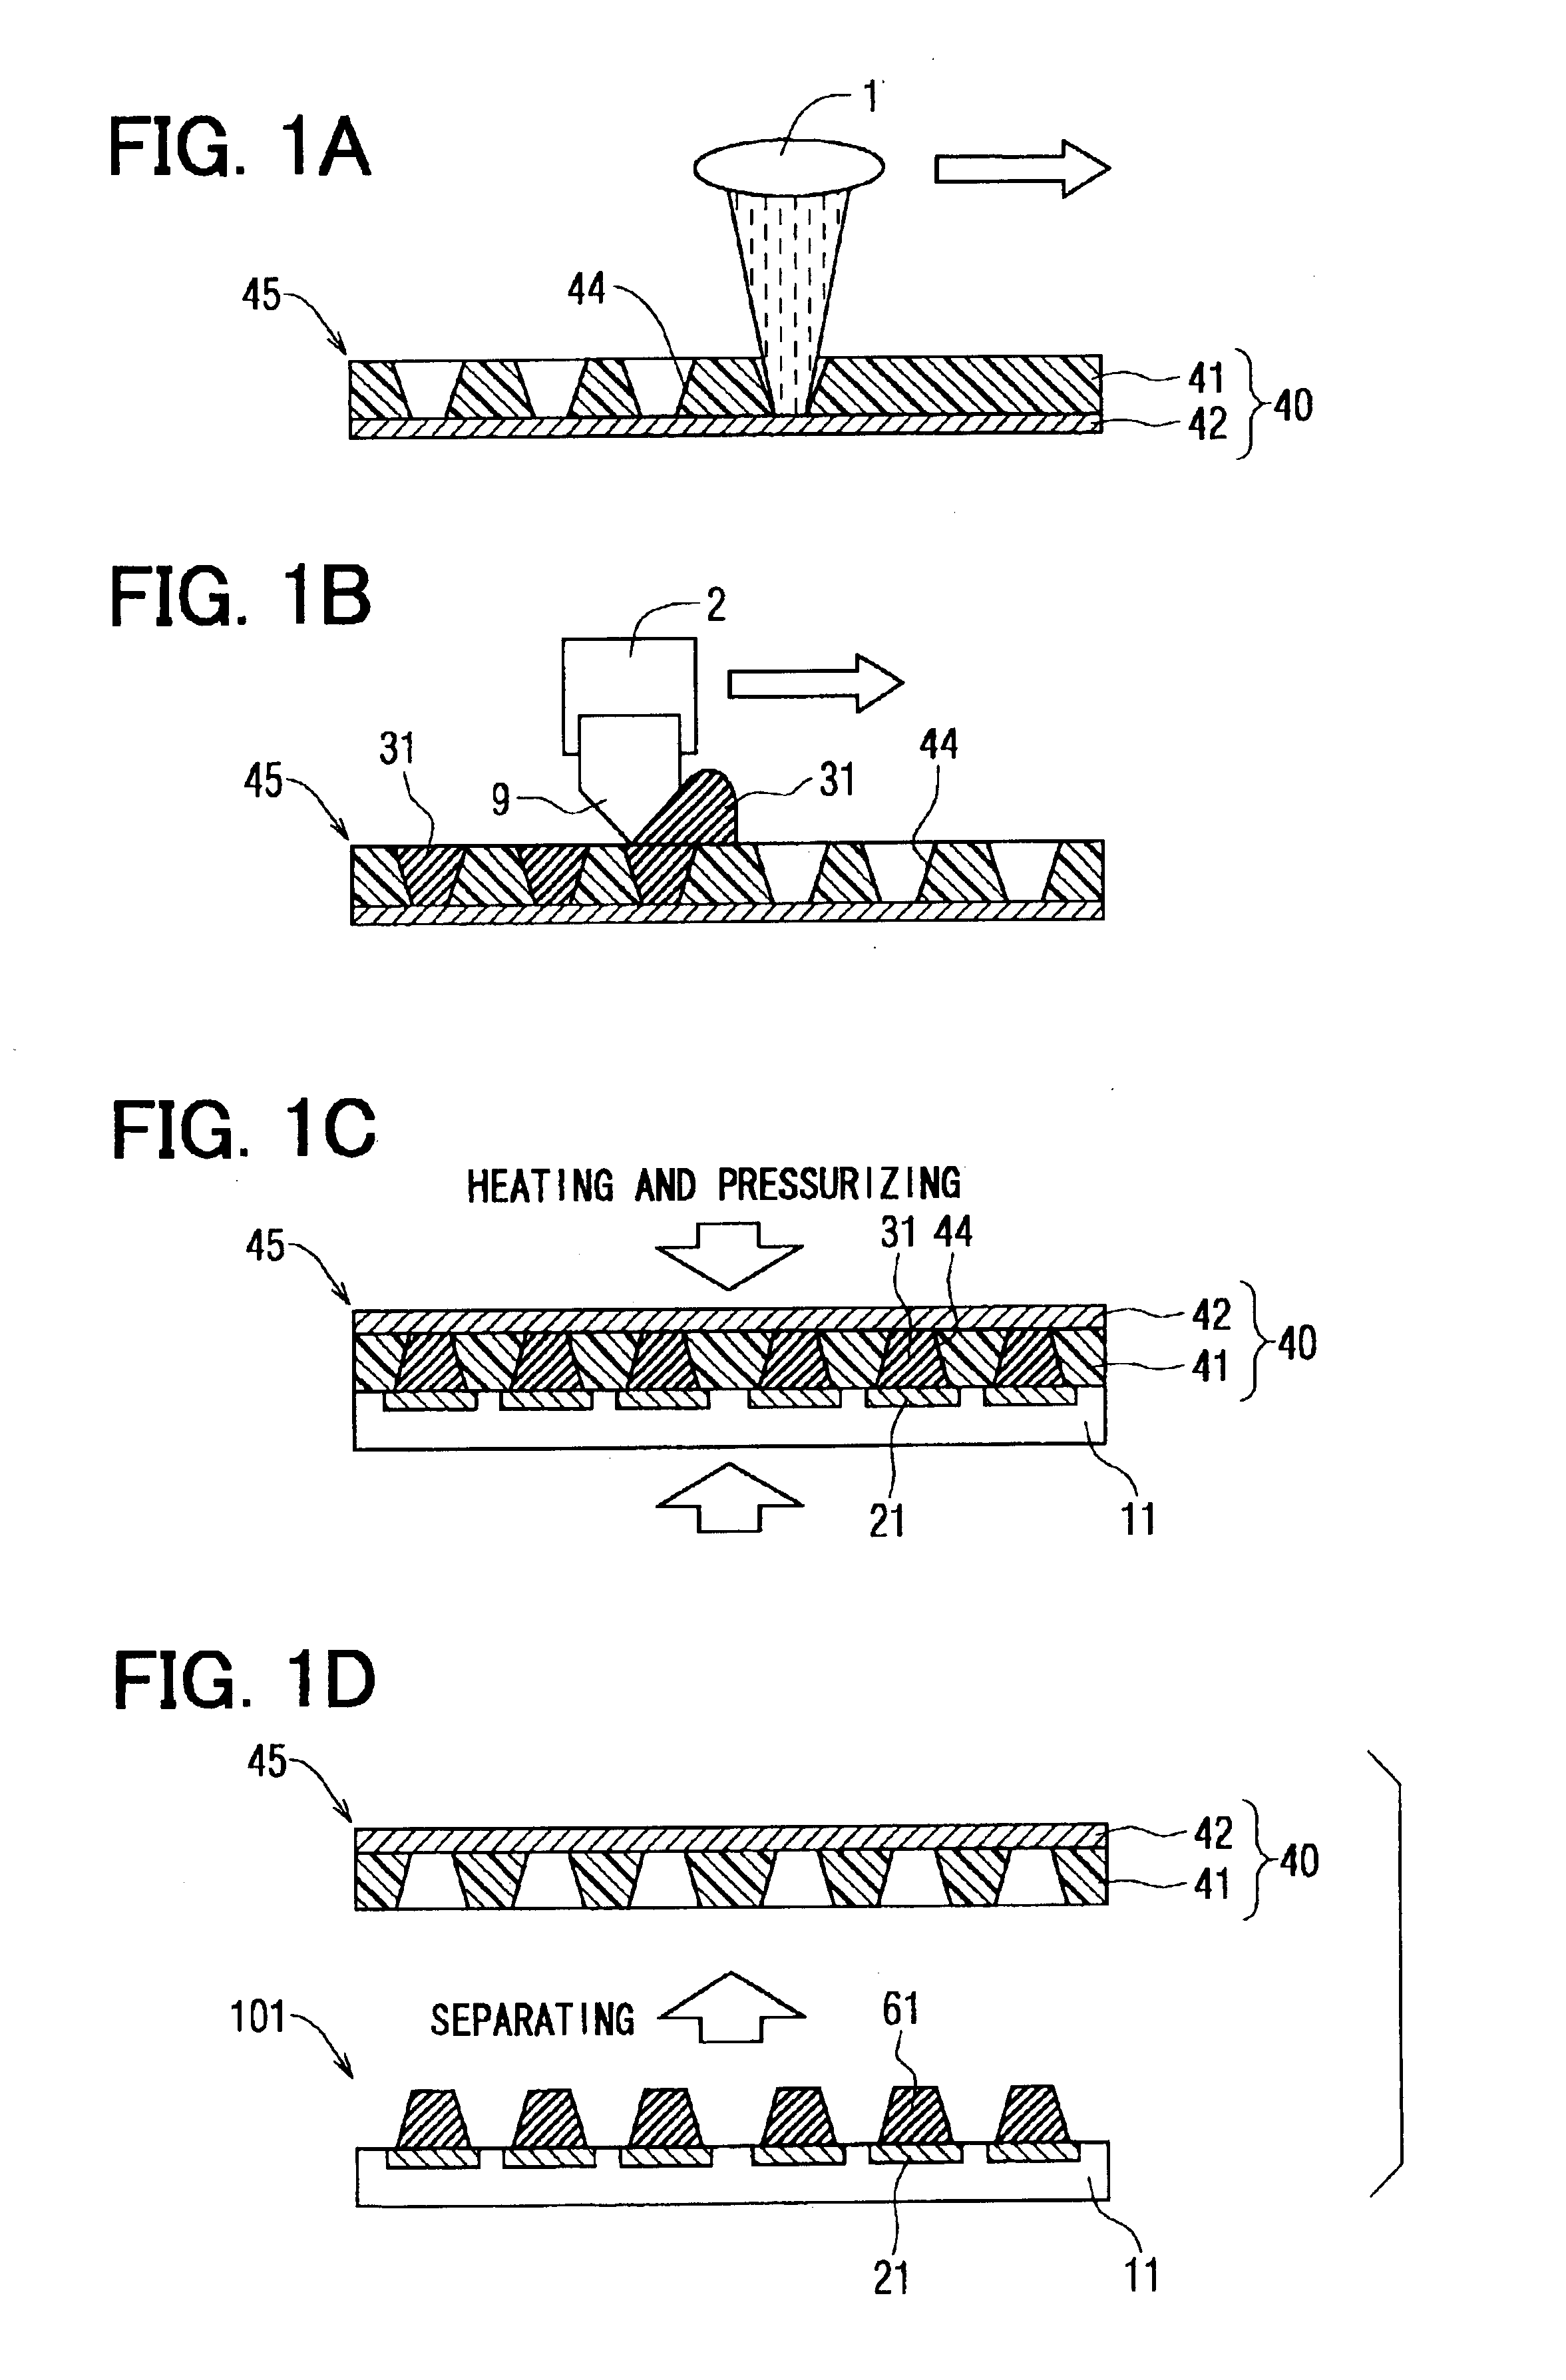 Substrate having a plurality of bumps, method of forming the same, and method of bonding substrate to another